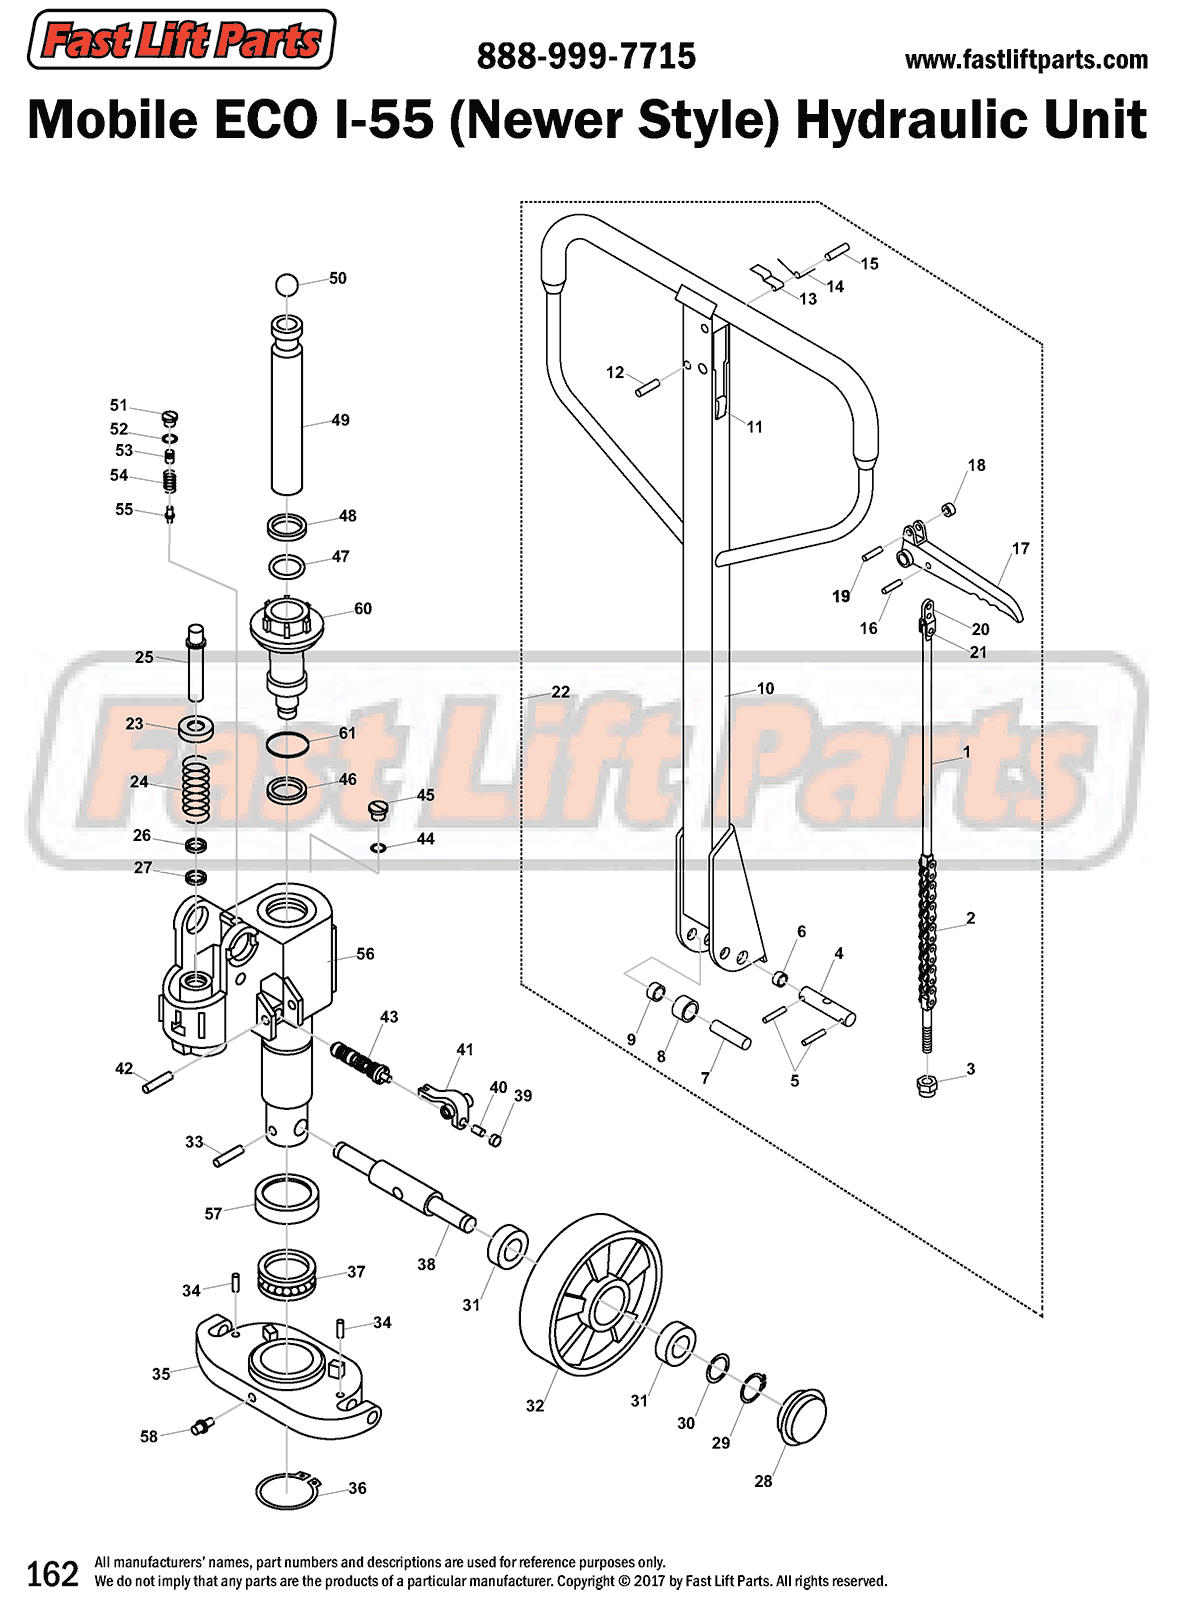 Mobile ECO I-55 (Newer) Hydraulic Unit Line Drawing